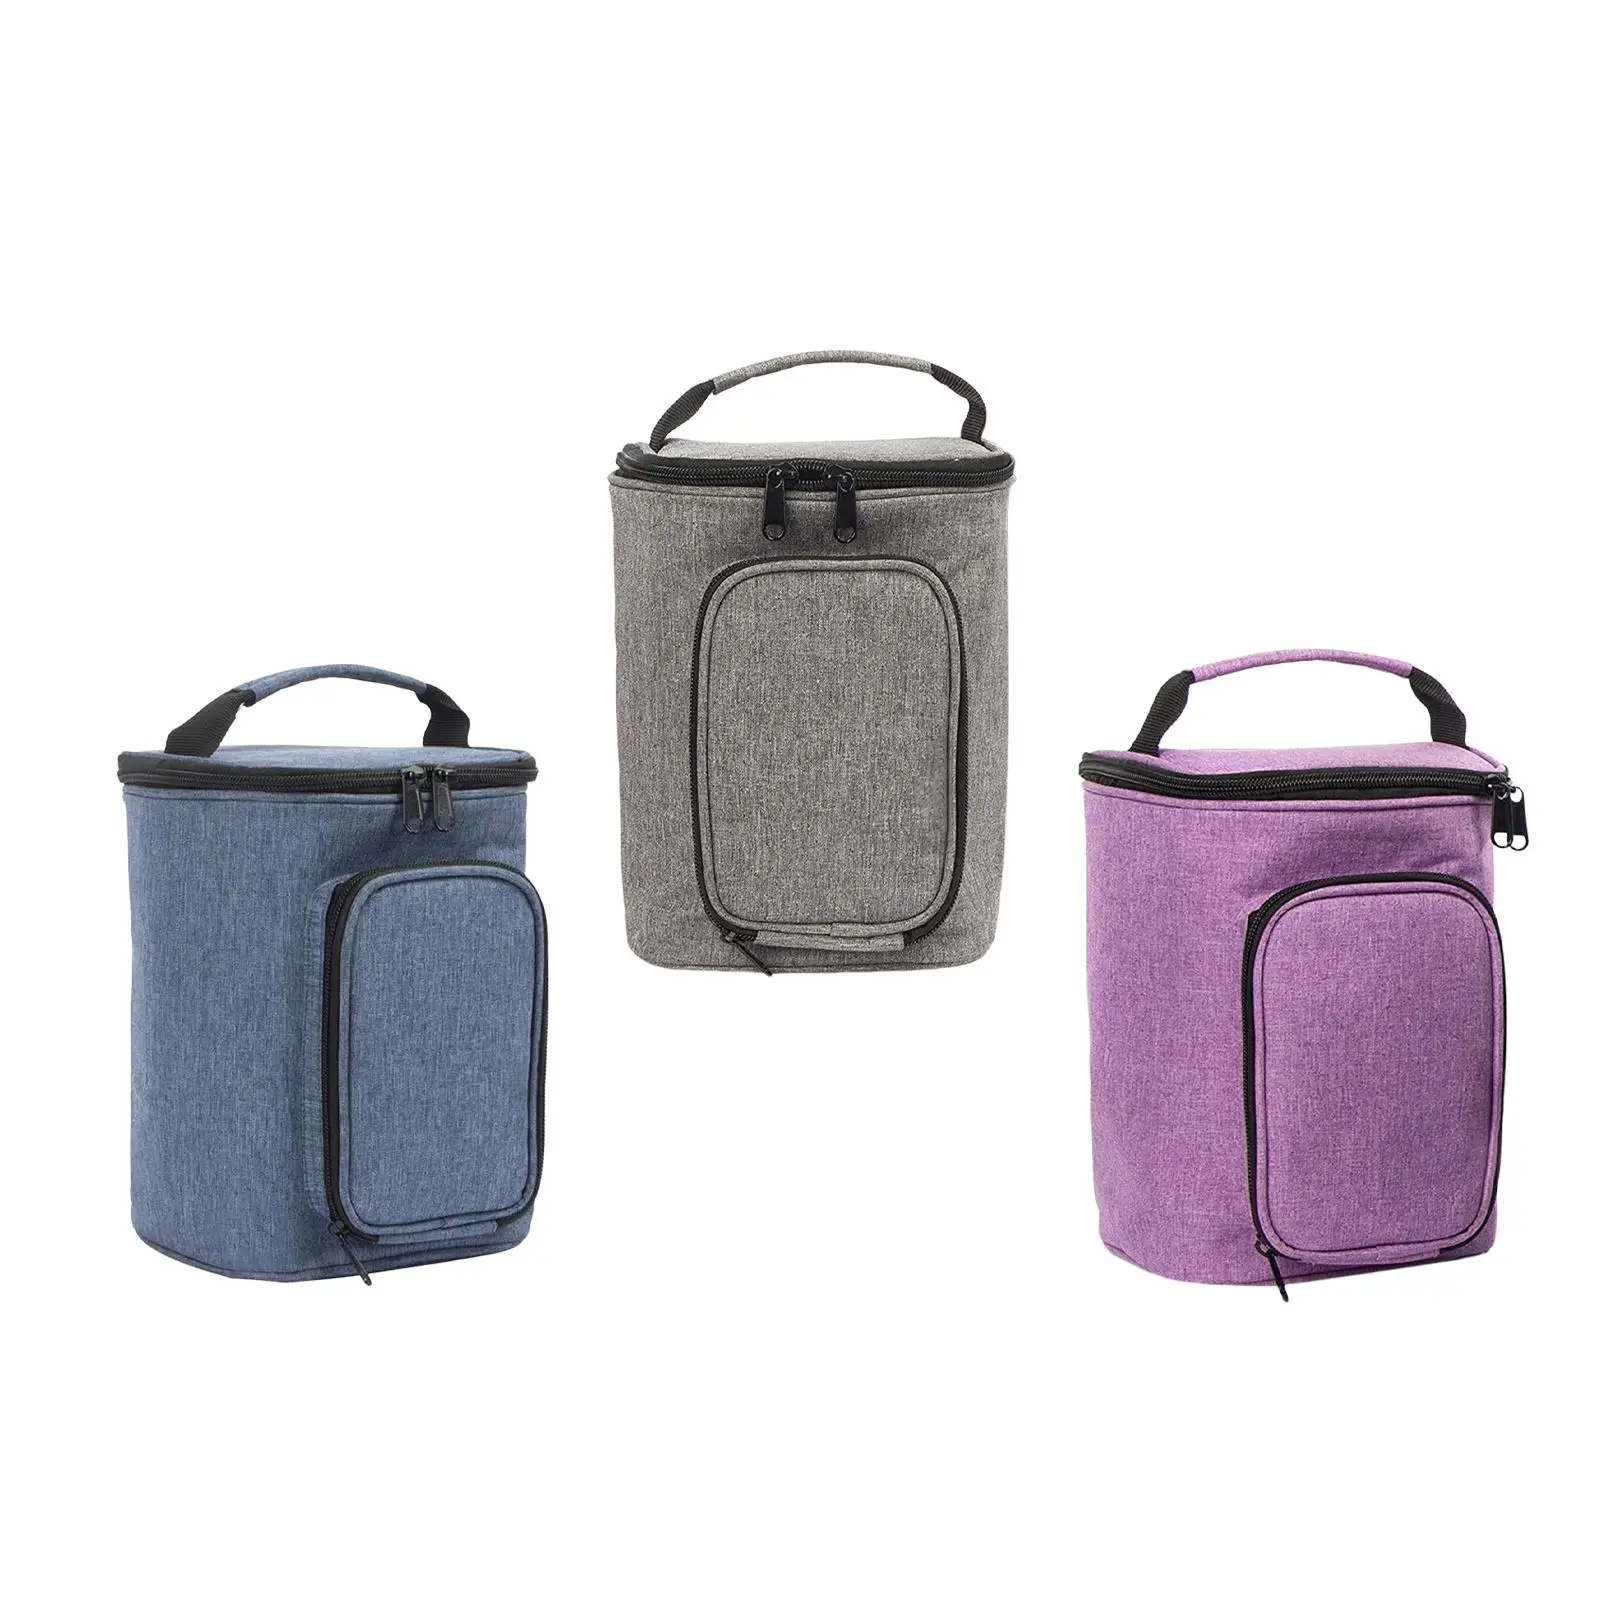 Carrying Storage Bag for Water Flosser with Small Mesh Pocket Oxford Cloth Accessory Water Flosser Storage Bag Cosmetic Bag